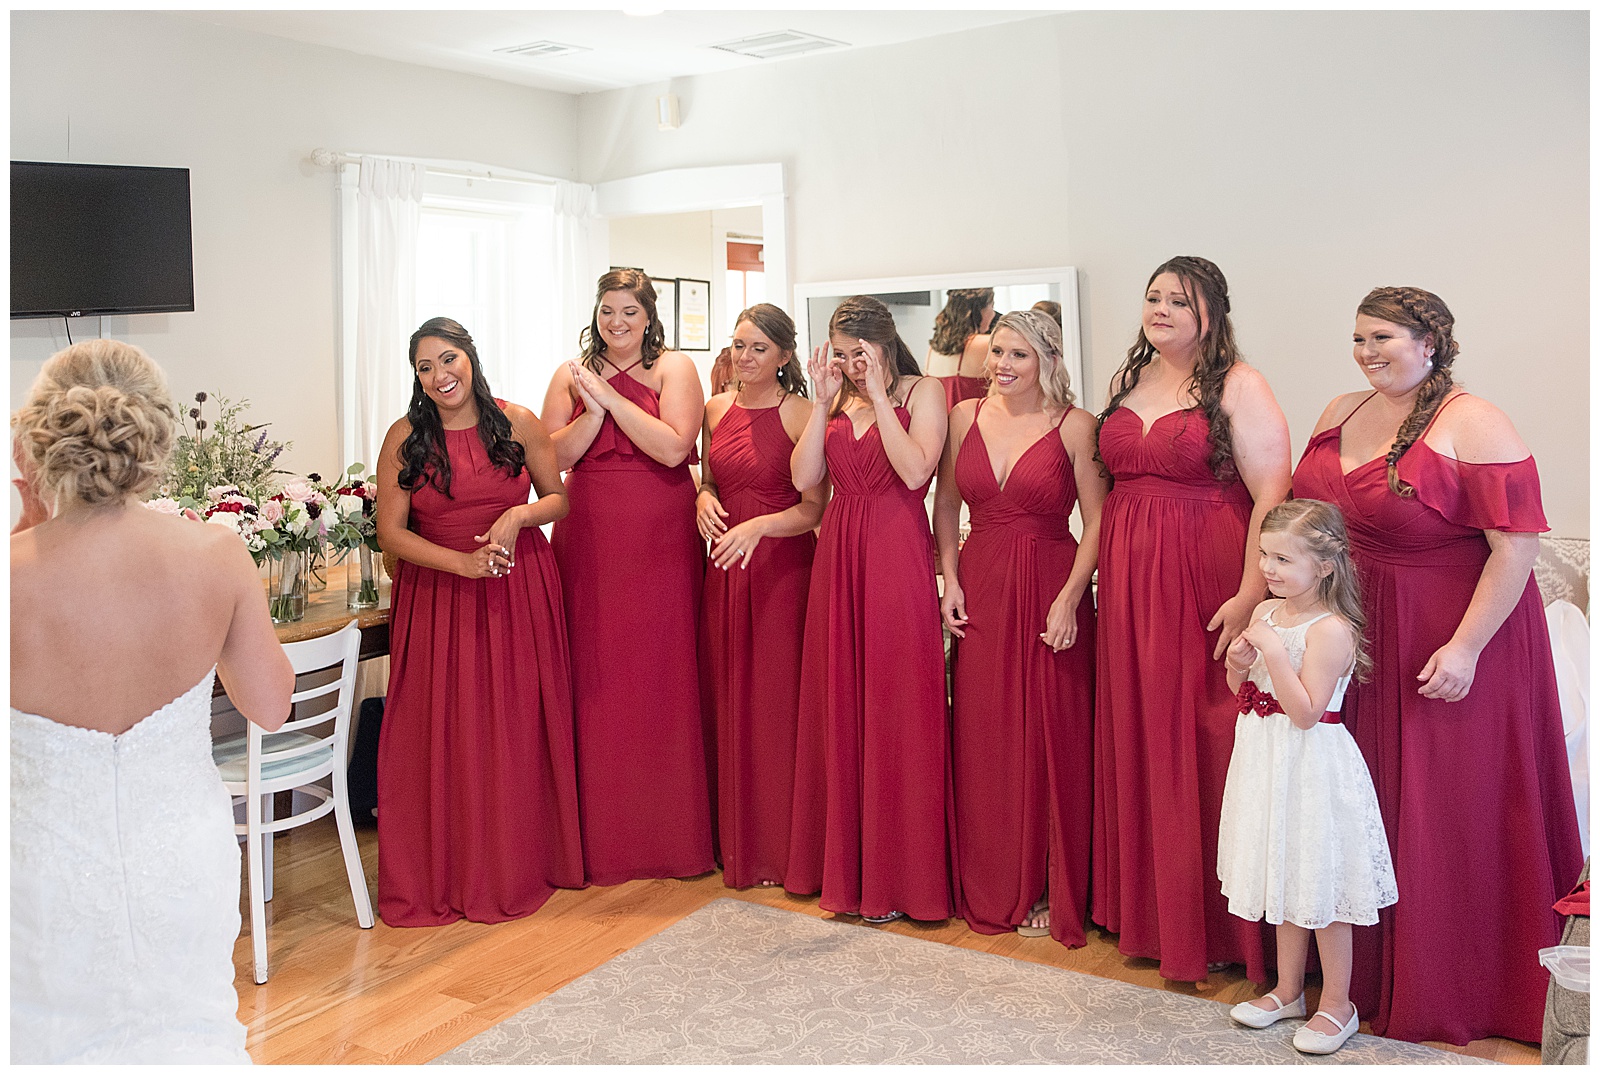 bride stands in lower left corner of photo with her back to the camera in bridal sweet with her row of bridesmaids turned towards her smiling and wiping tears as they see her in her gown and the flower girl standing in front the the bridesmaid on the far right at Riverdale Manor in Lancaster, PA